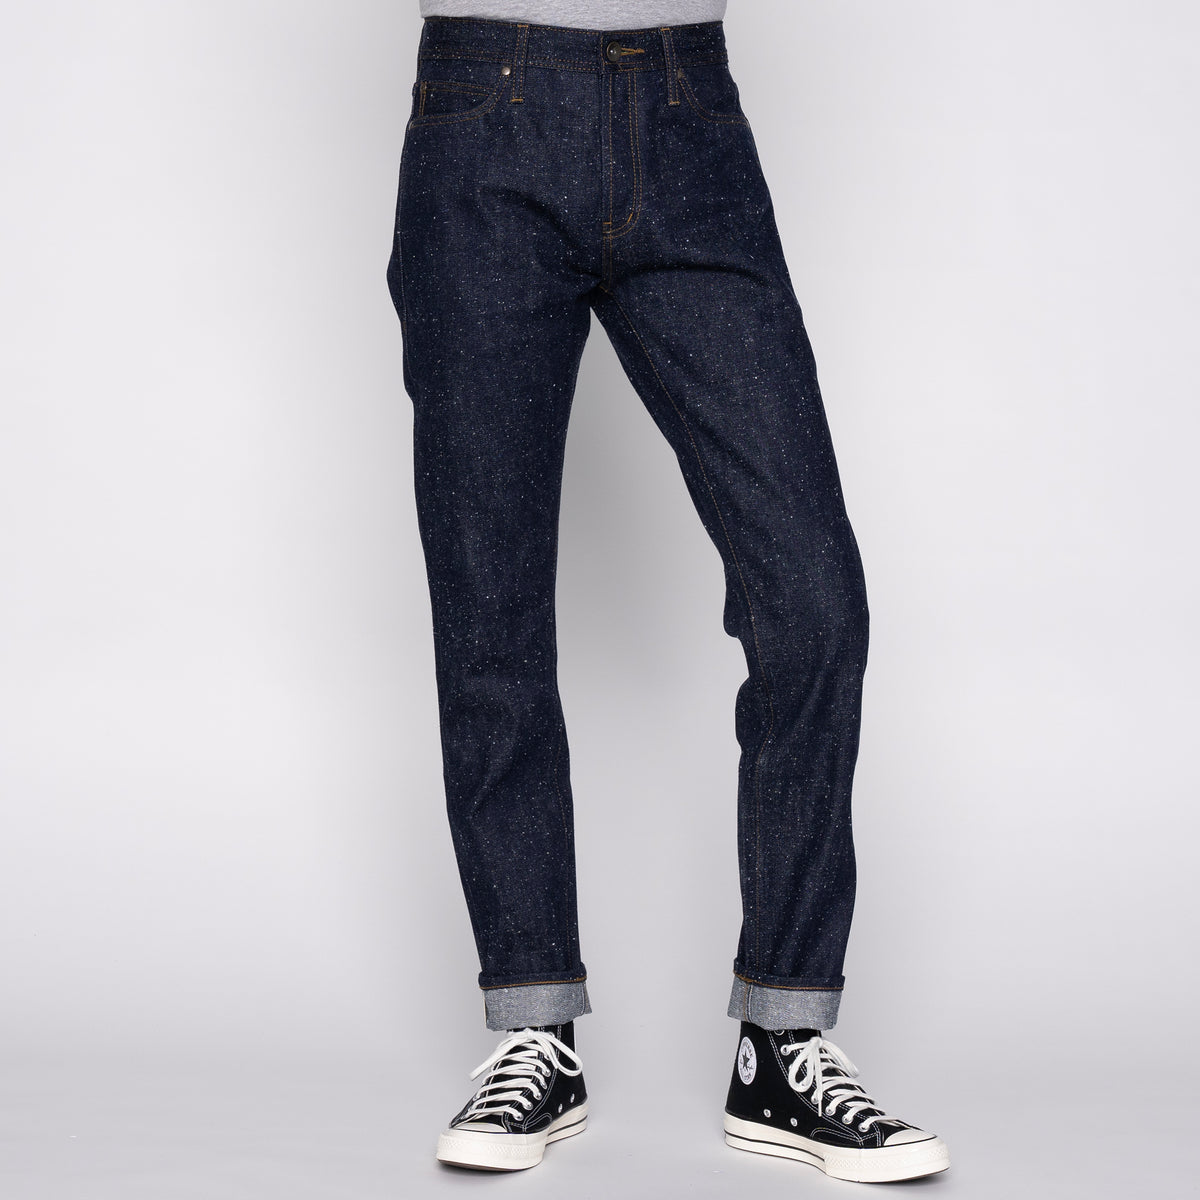 Tight Fit - 18oz Neppy Selvedge | The Unbranded Brand